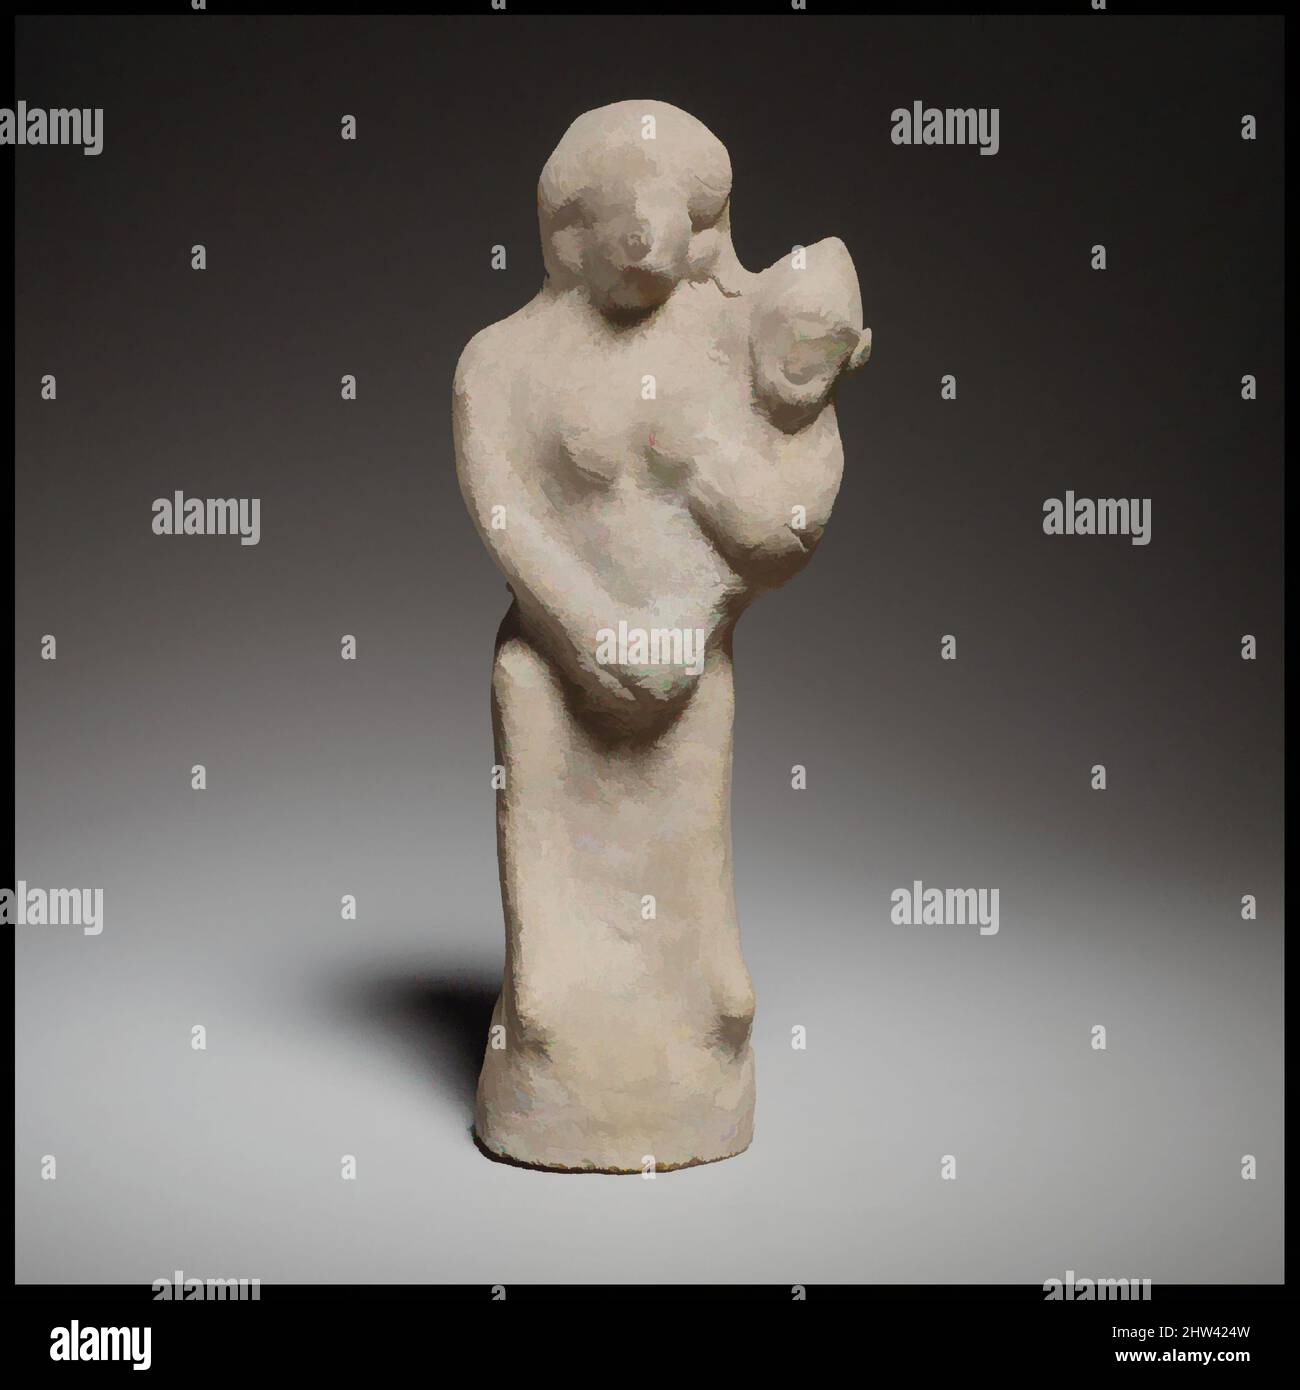 Art inspired by Seated female figurine holding a baby, Cypro-Archaic II, ca. 600–480 B.C., Cypriot, Terracotta; mold-made, H. 7 7/16 in. (18.9 cm), Terracottas, The figurine was made from a very worn mold; the infant's face is handmade. It is solid except for the concave base, Classic works modernized by Artotop with a splash of modernity. Shapes, color and value, eye-catching visual impact on art. Emotions through freedom of artworks in a contemporary way. A timeless message pursuing a wildly creative new direction. Artists turning to the digital medium and creating the Artotop NFT Stock Photo